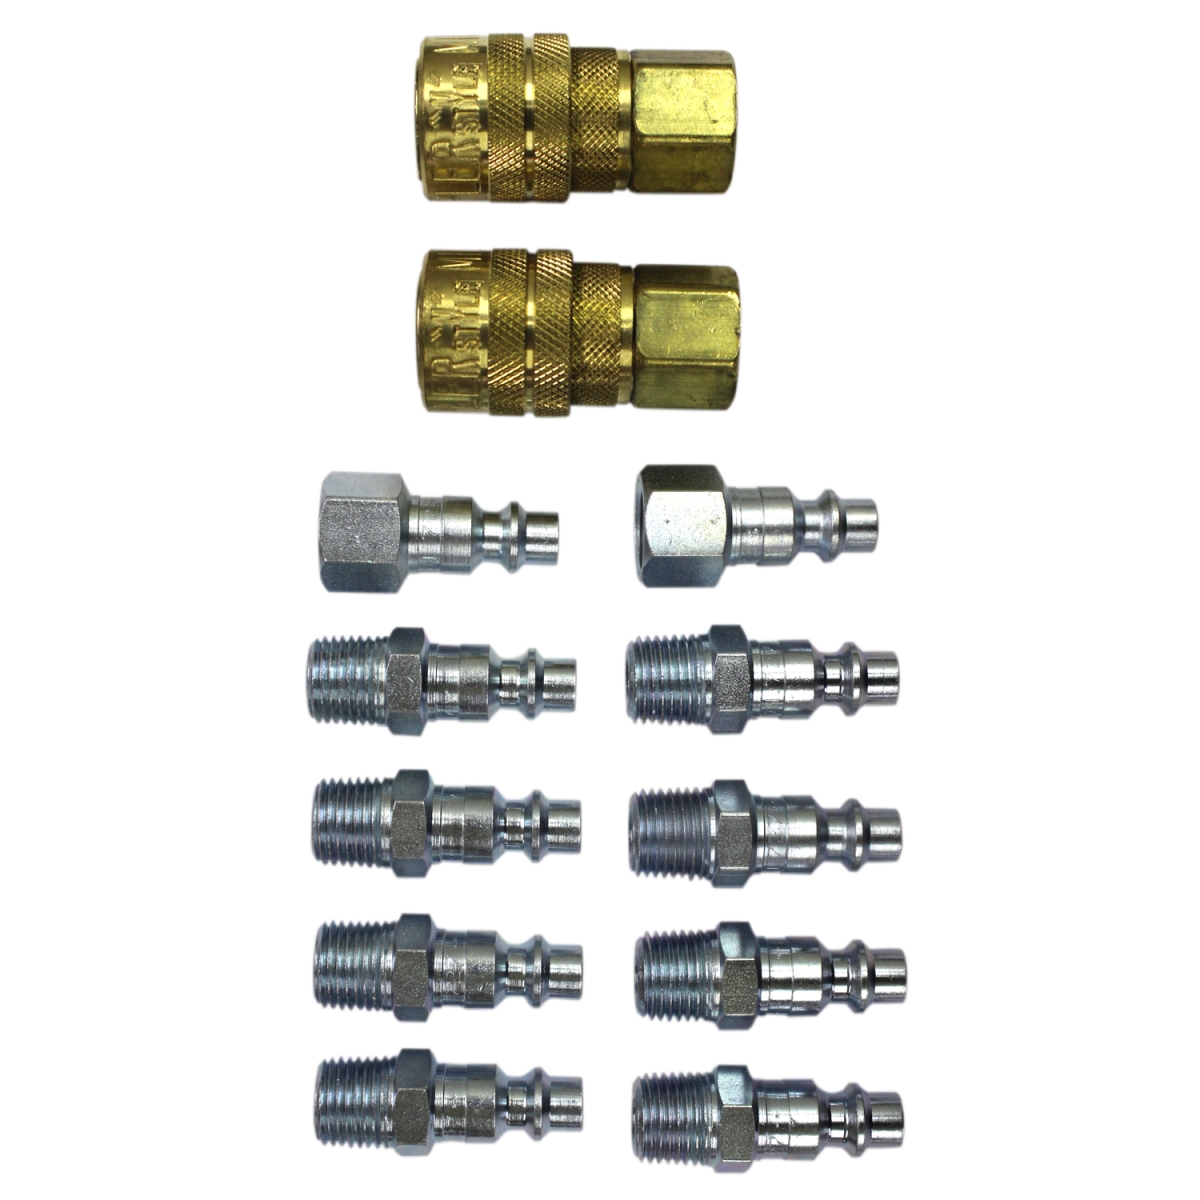 0.25 In. Npt M Style Coupler & Plug Kit - 12 Pieces